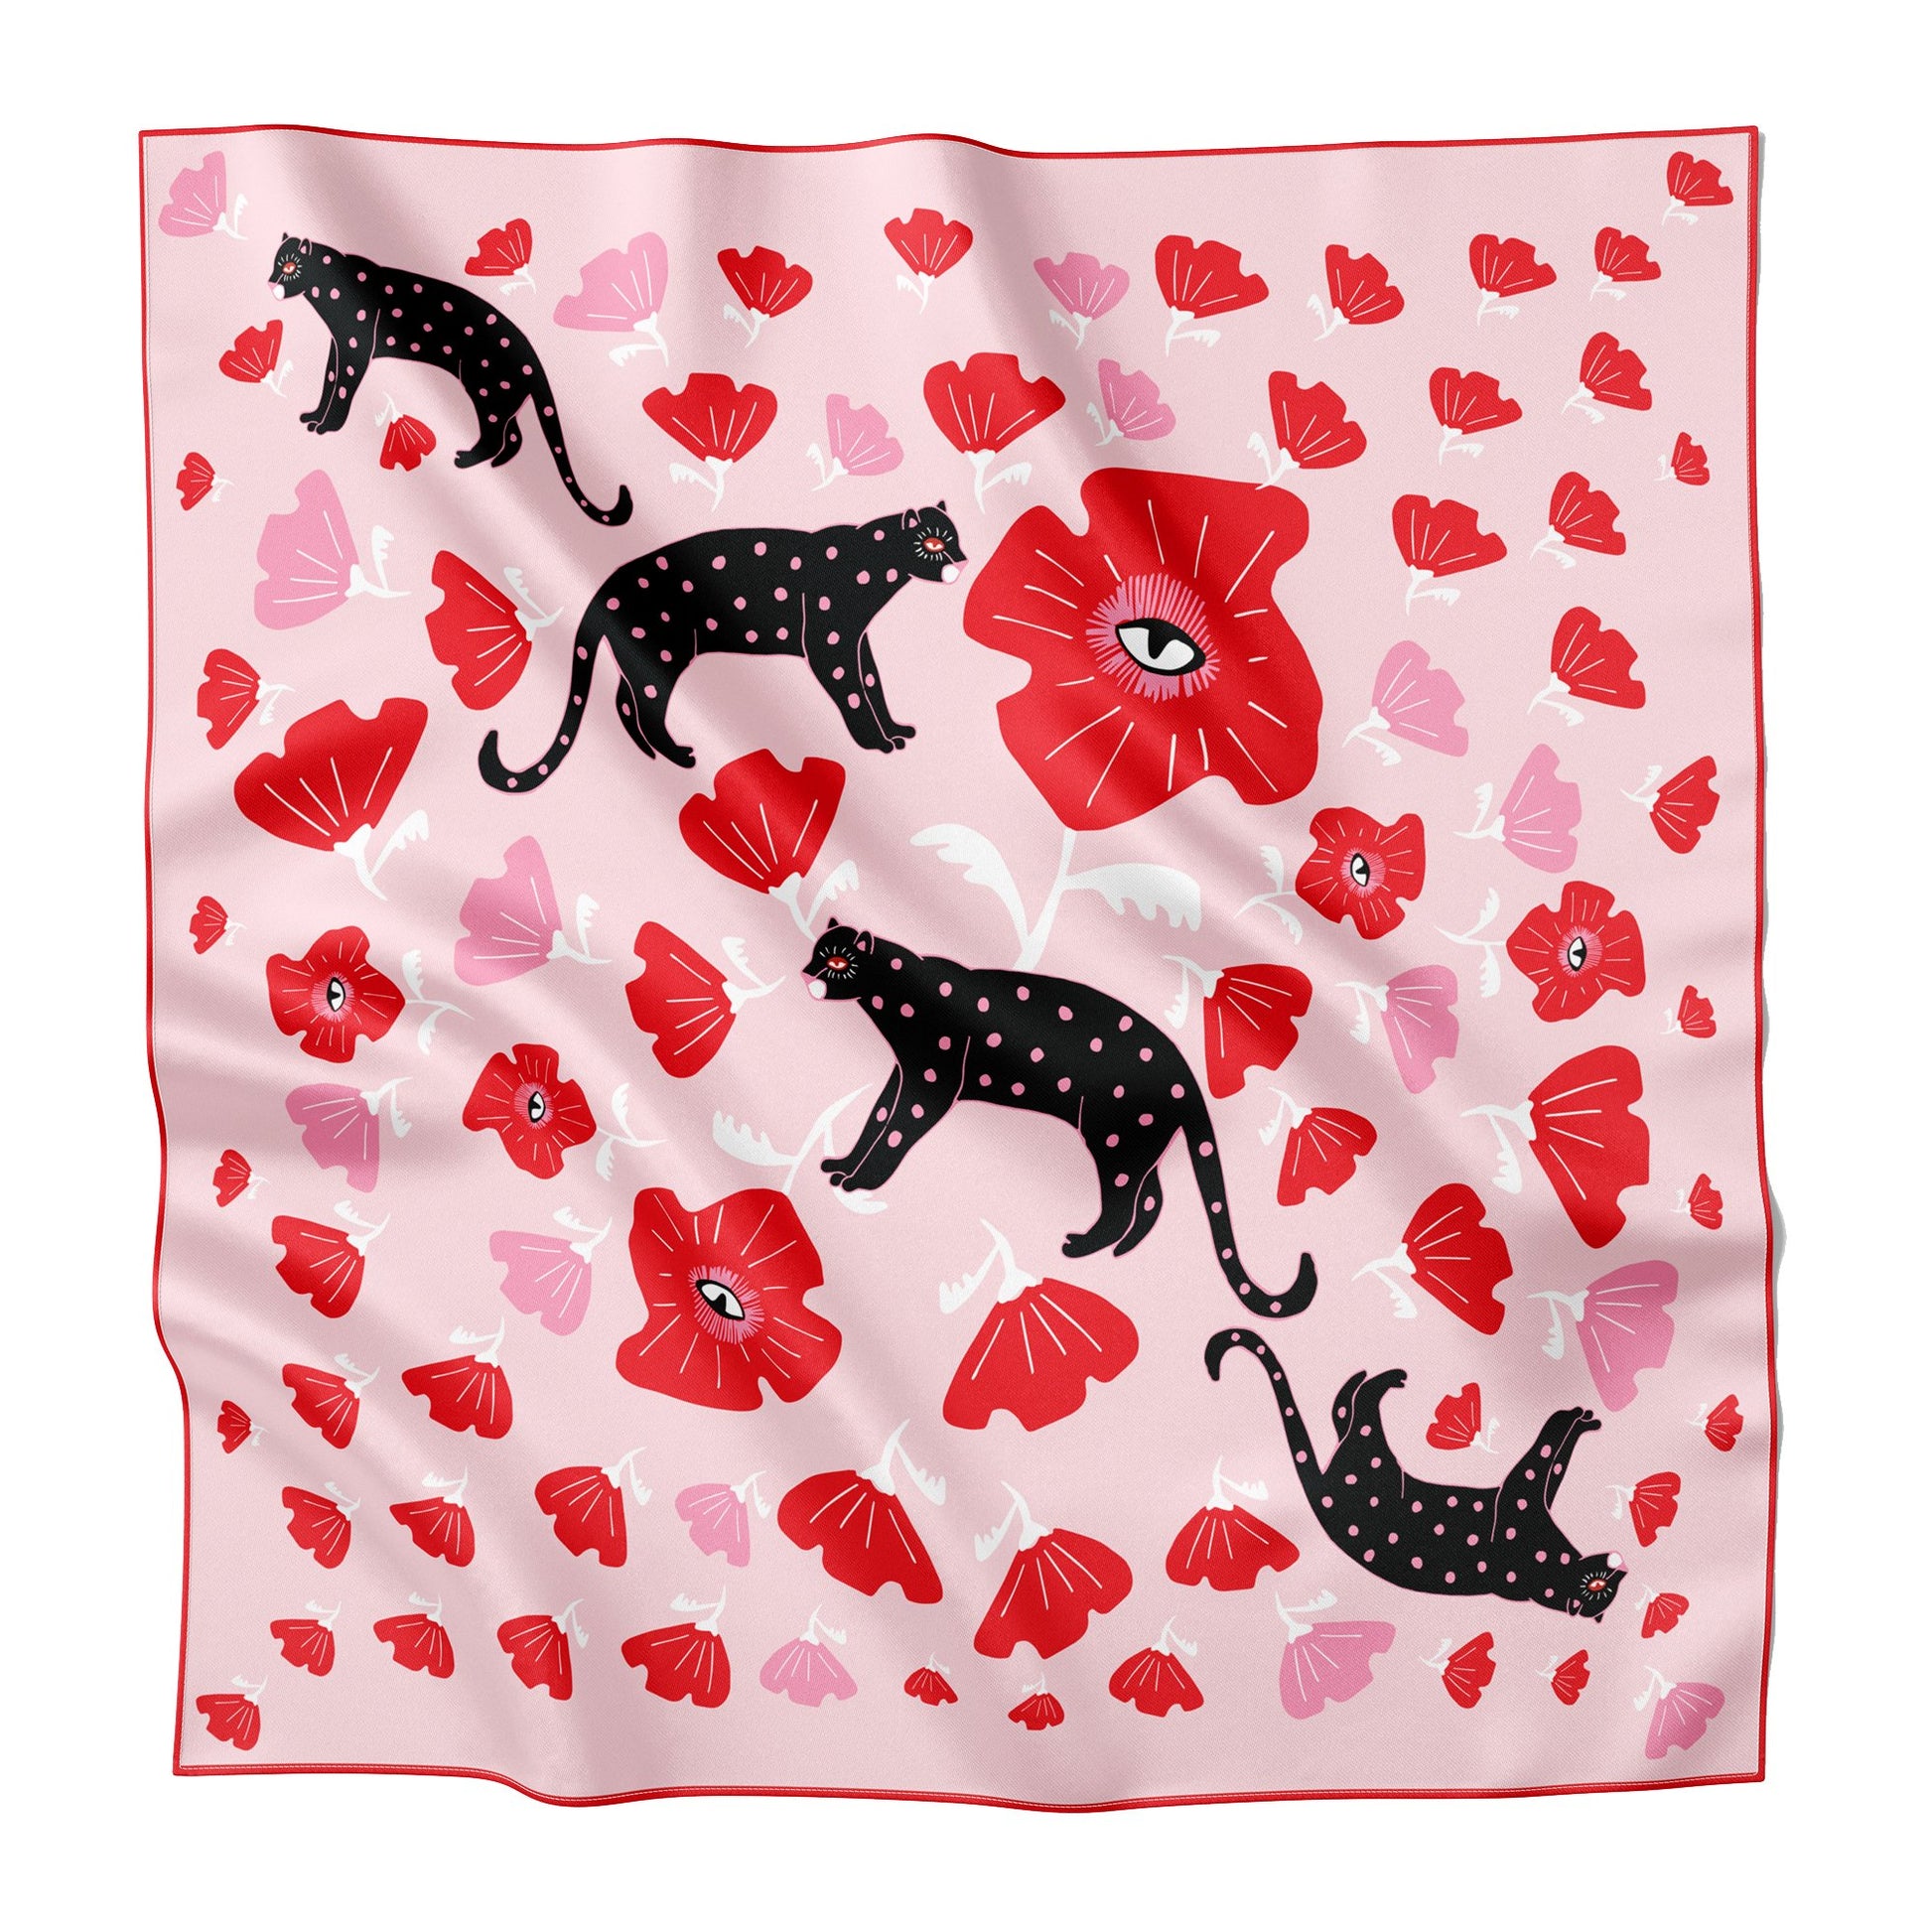 A pink silk bandana with black leopards and red flowers.